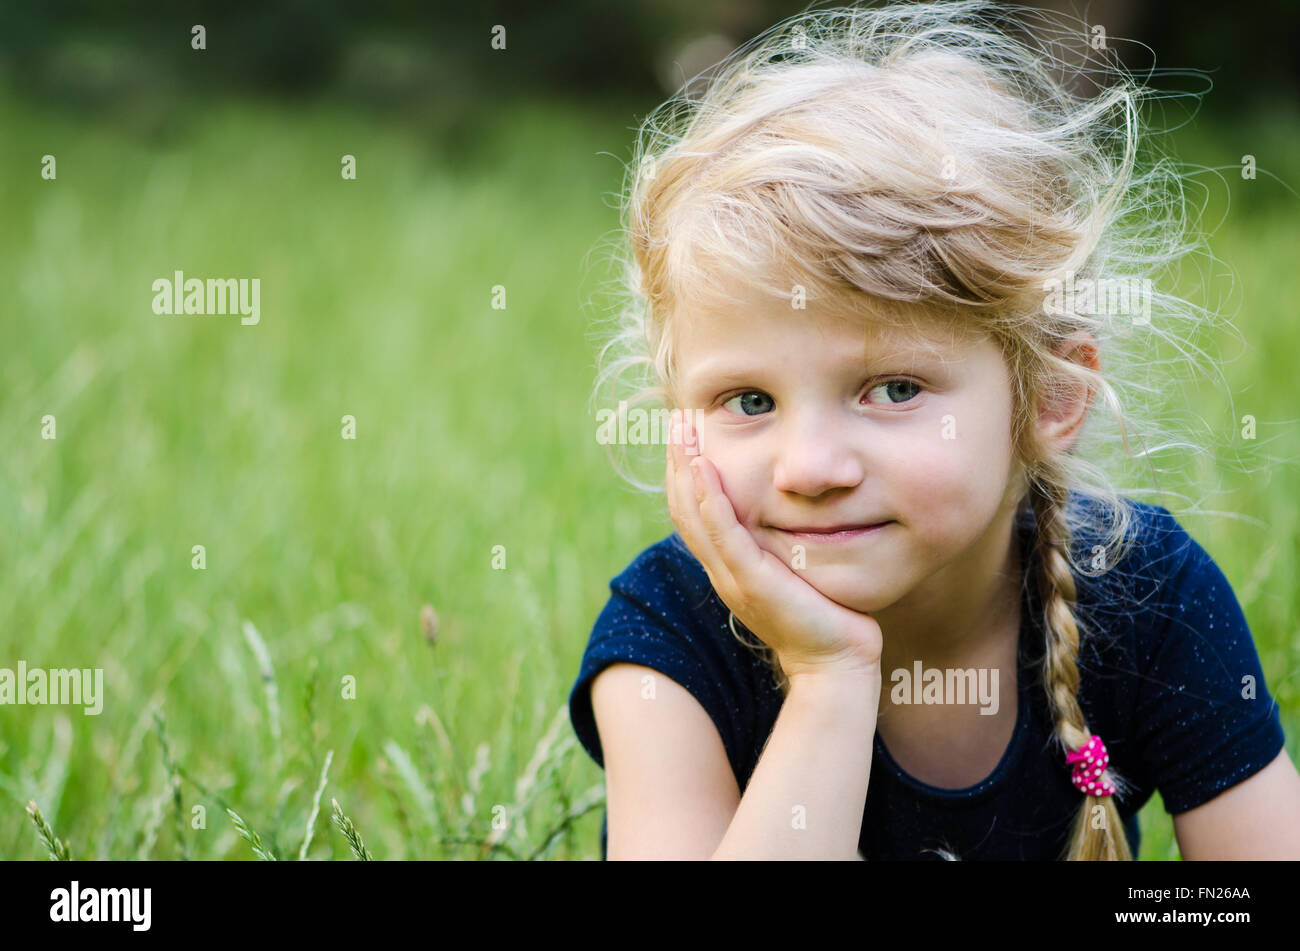 portrait of thoughtful blond girl with braided hair Stock Photo